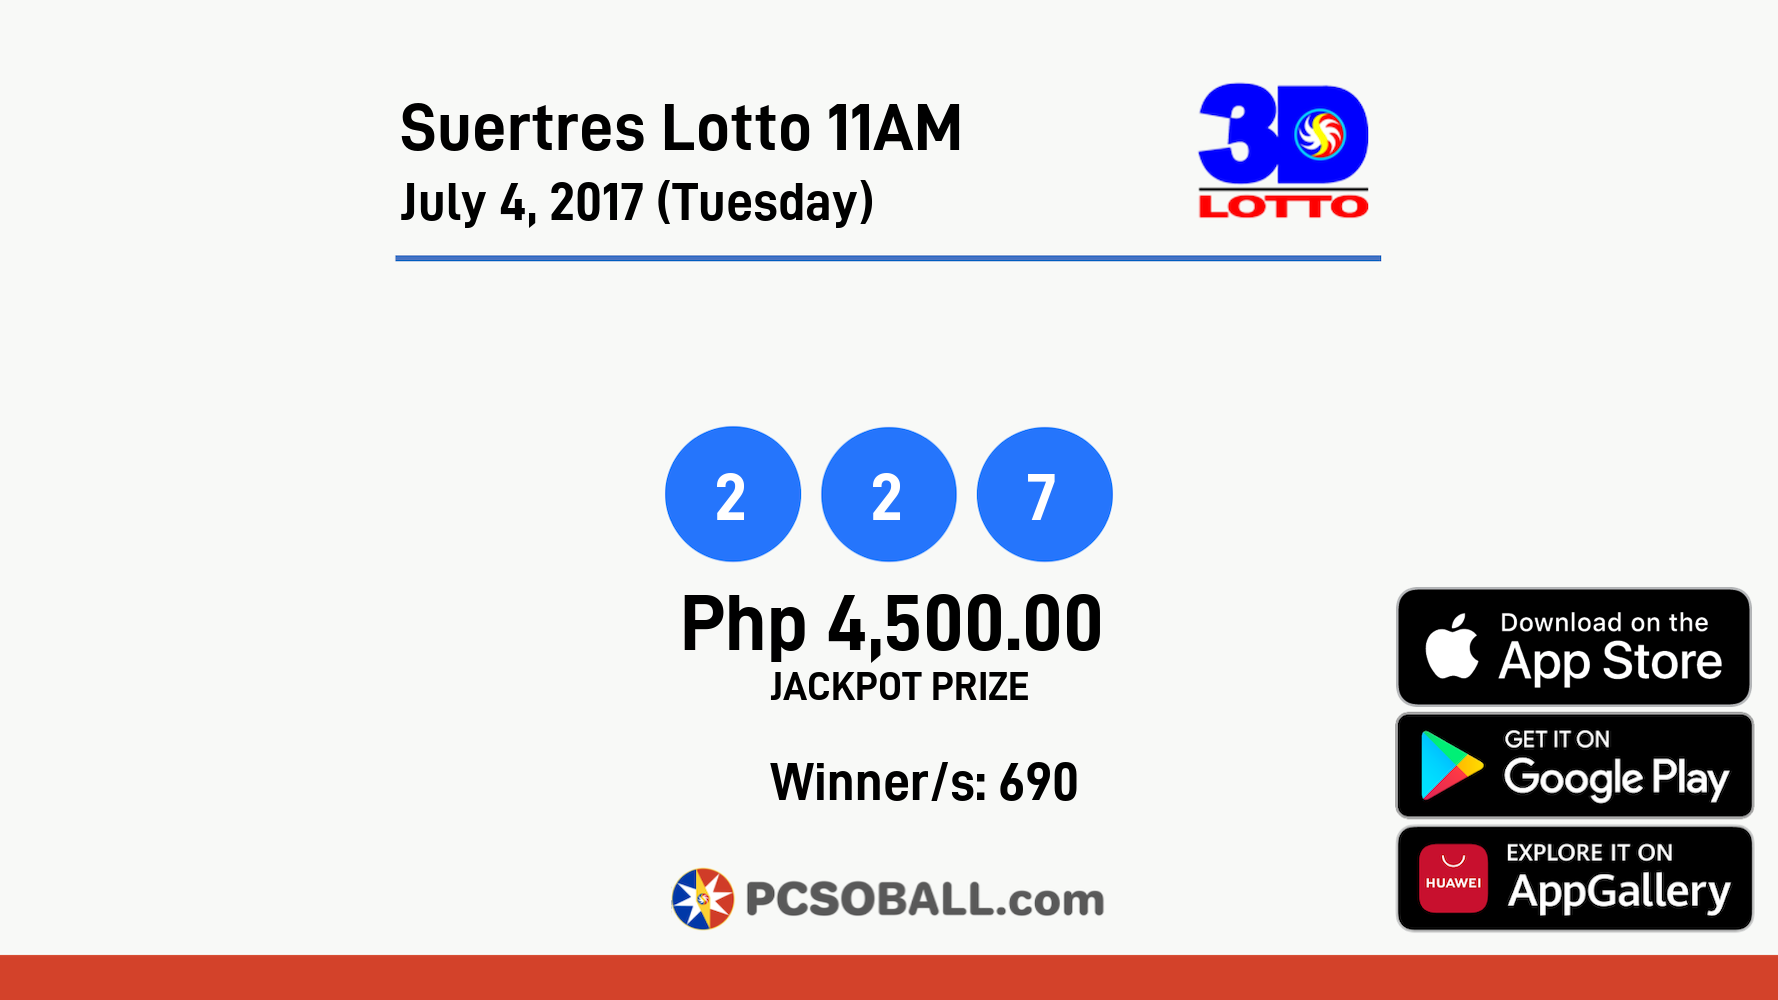 Suertres Lotto 11AM July 4, 2017 (Tuesday) Result